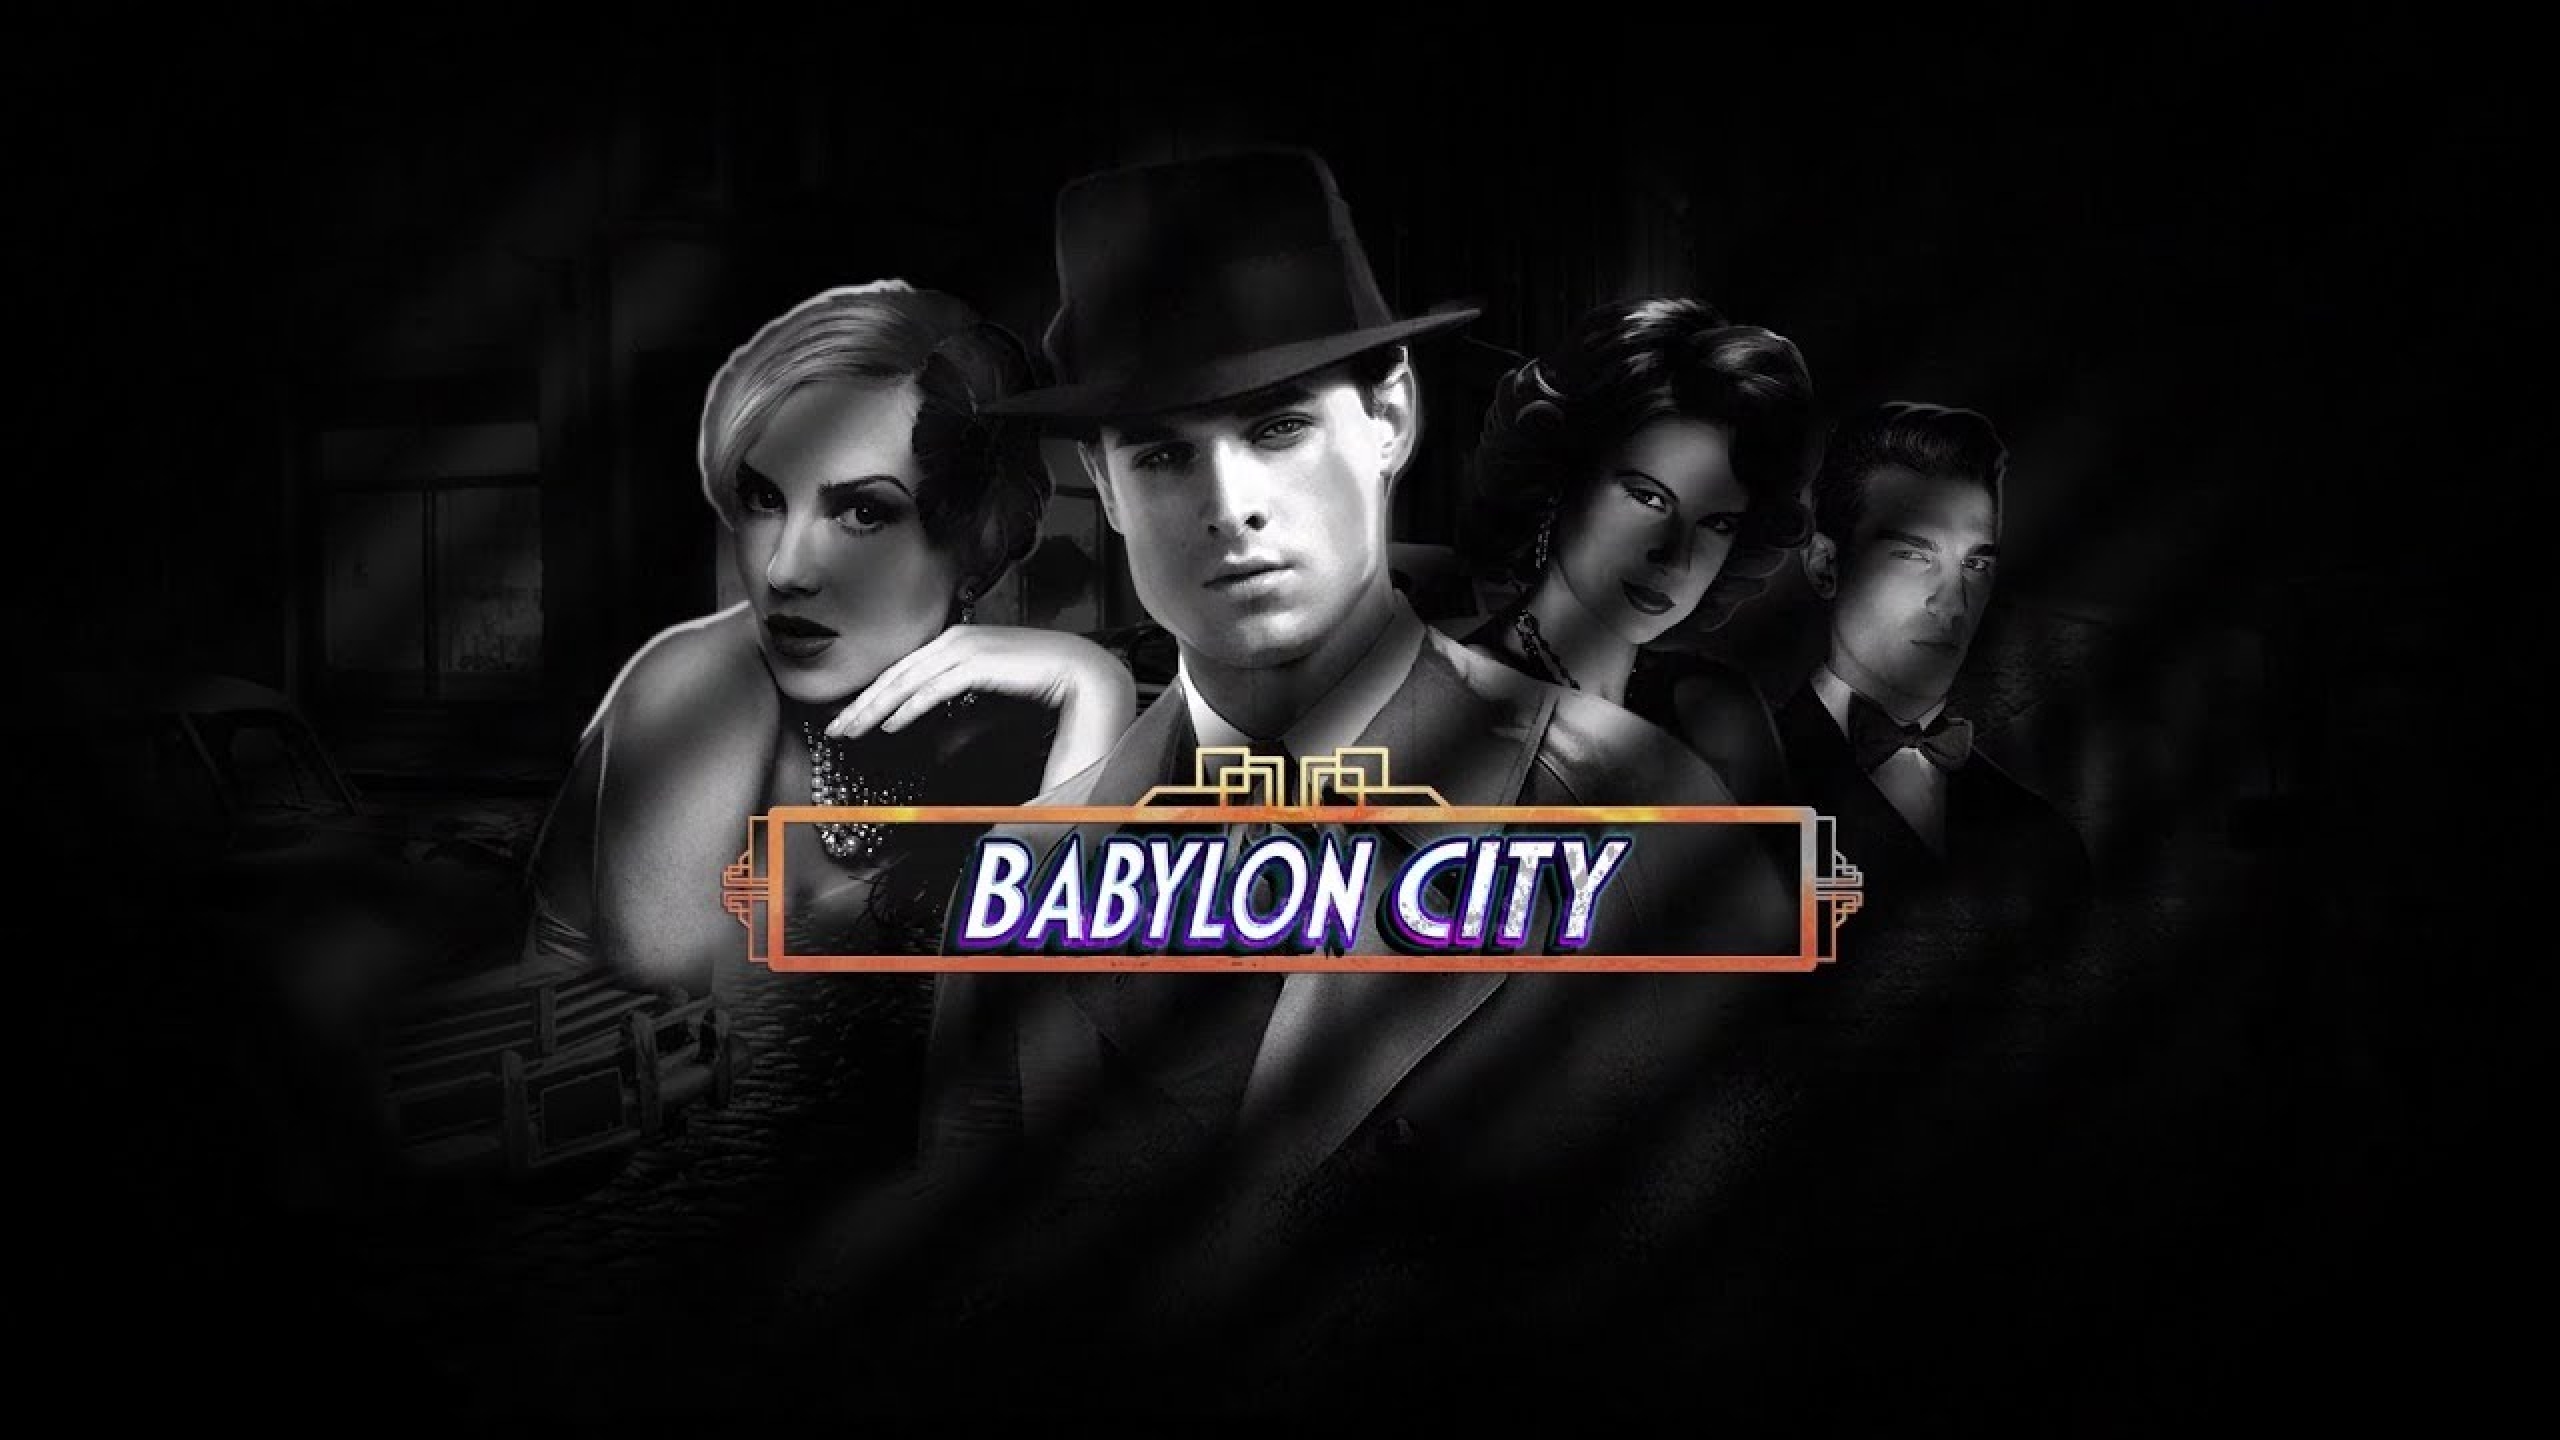 The Babylon City Online Slot Demo Game by High 5 Games